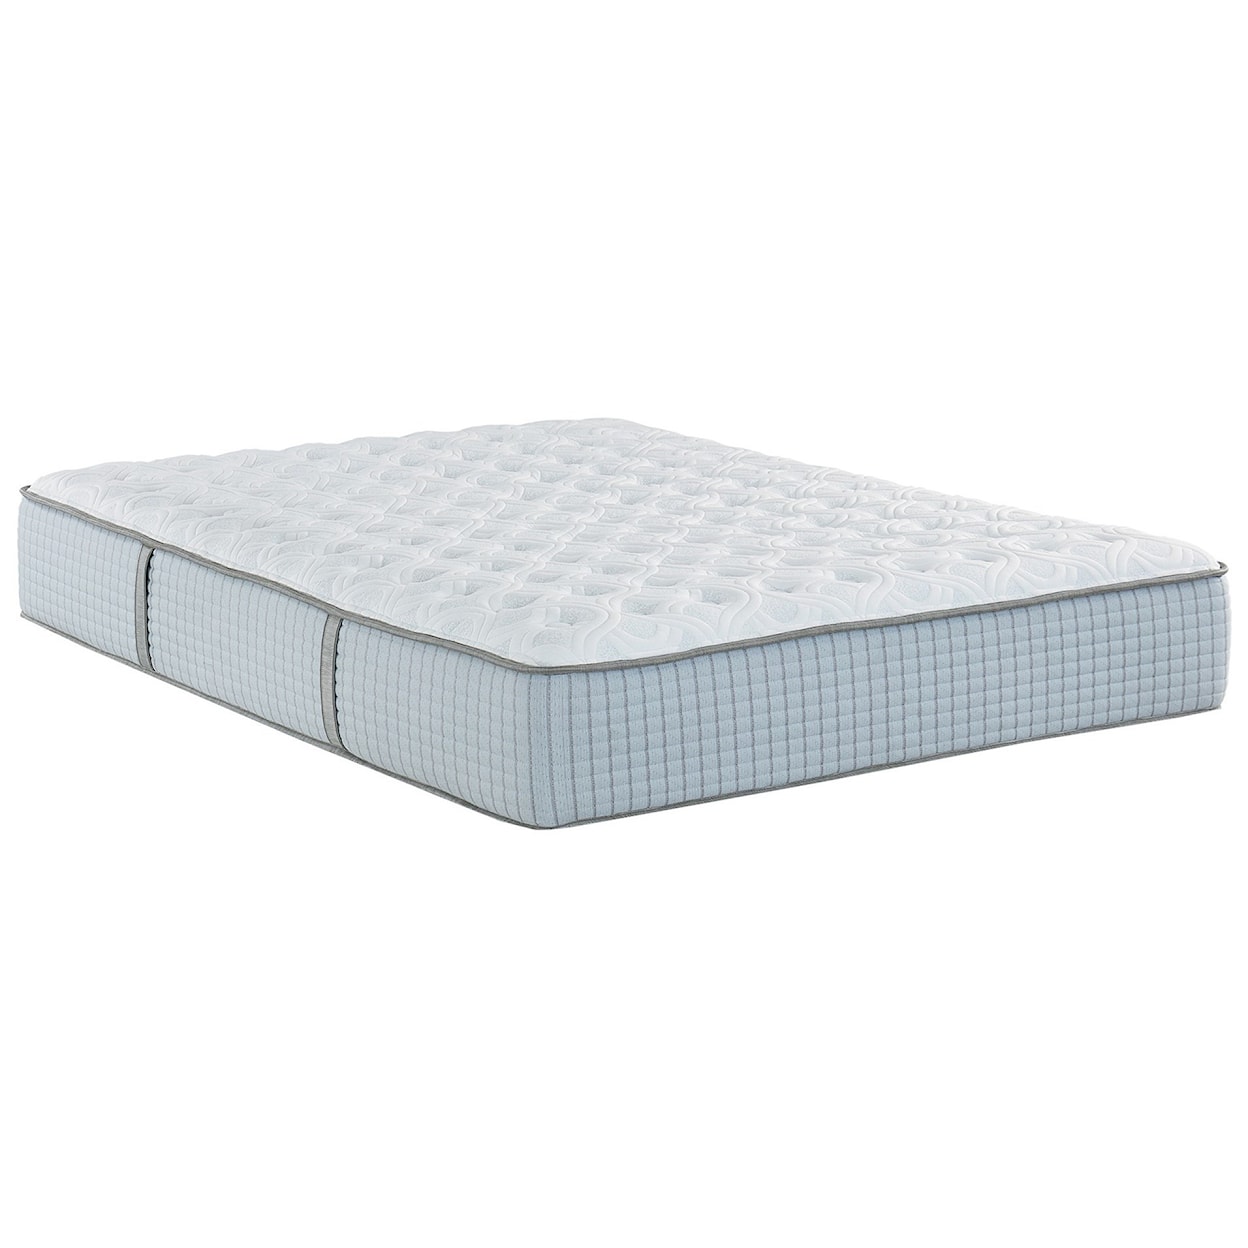 Restonic Clarion IV Luxury Plush and Luxury Firm Queen 2-Sided Firm / Plush Mattress